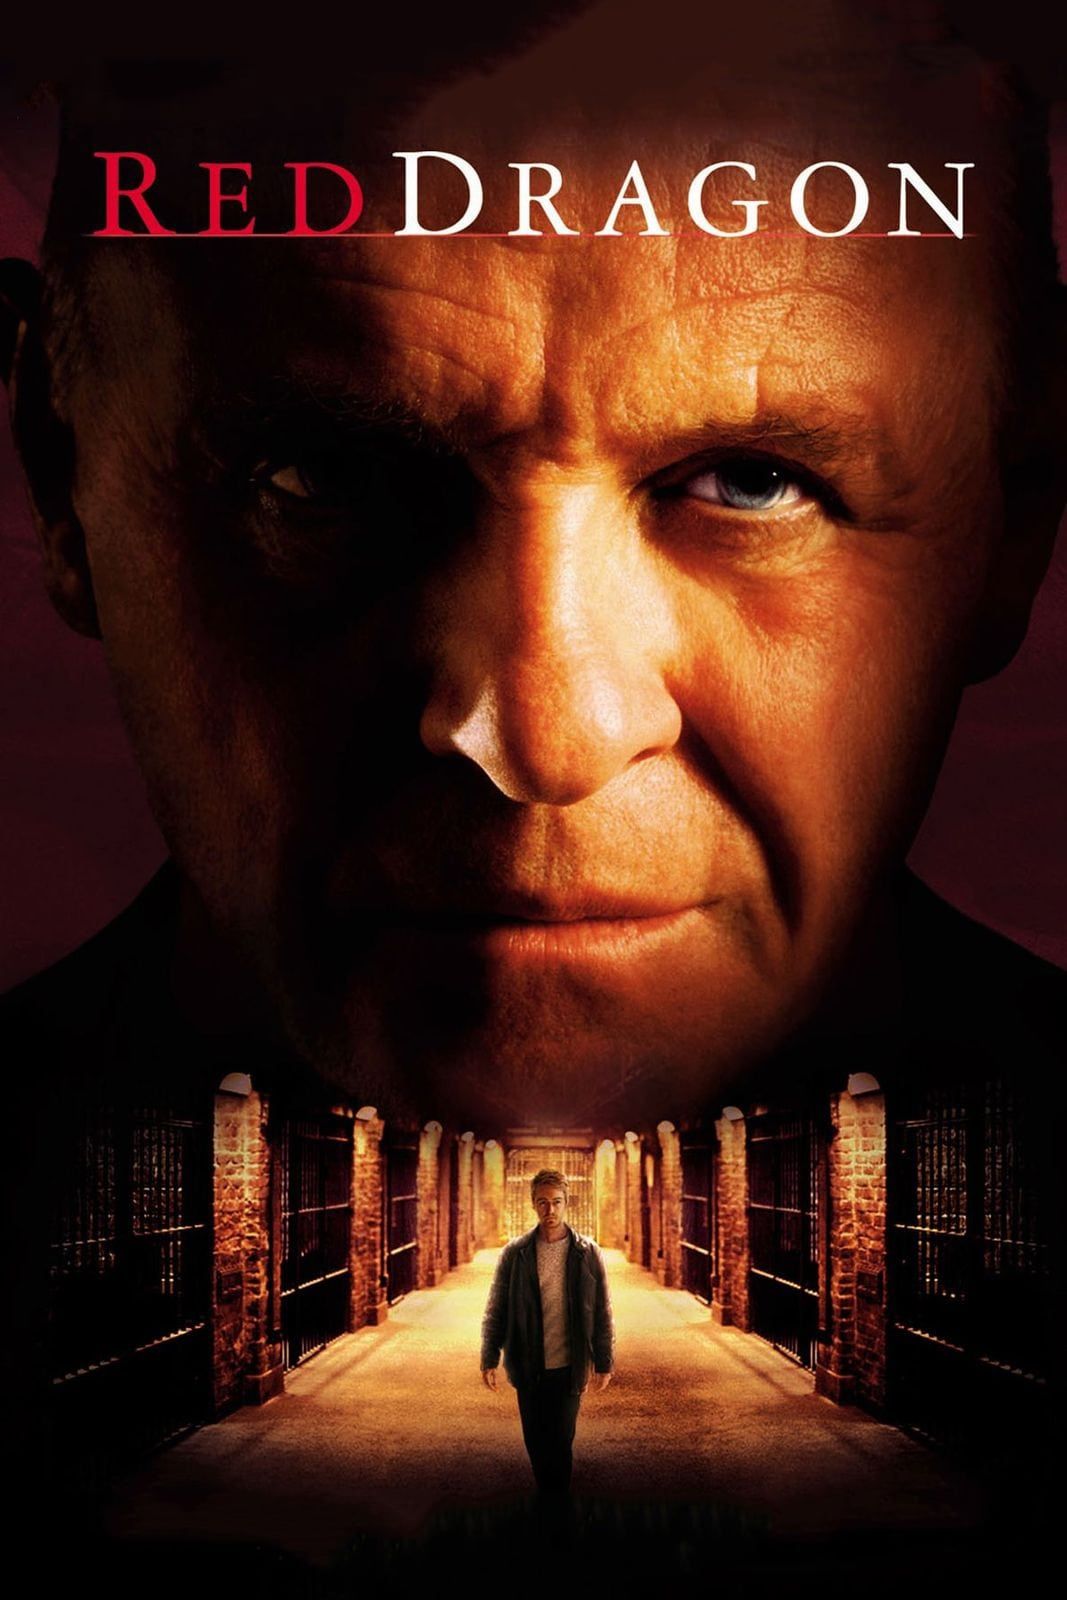 Red Dragon poster with Anthony Hopkins